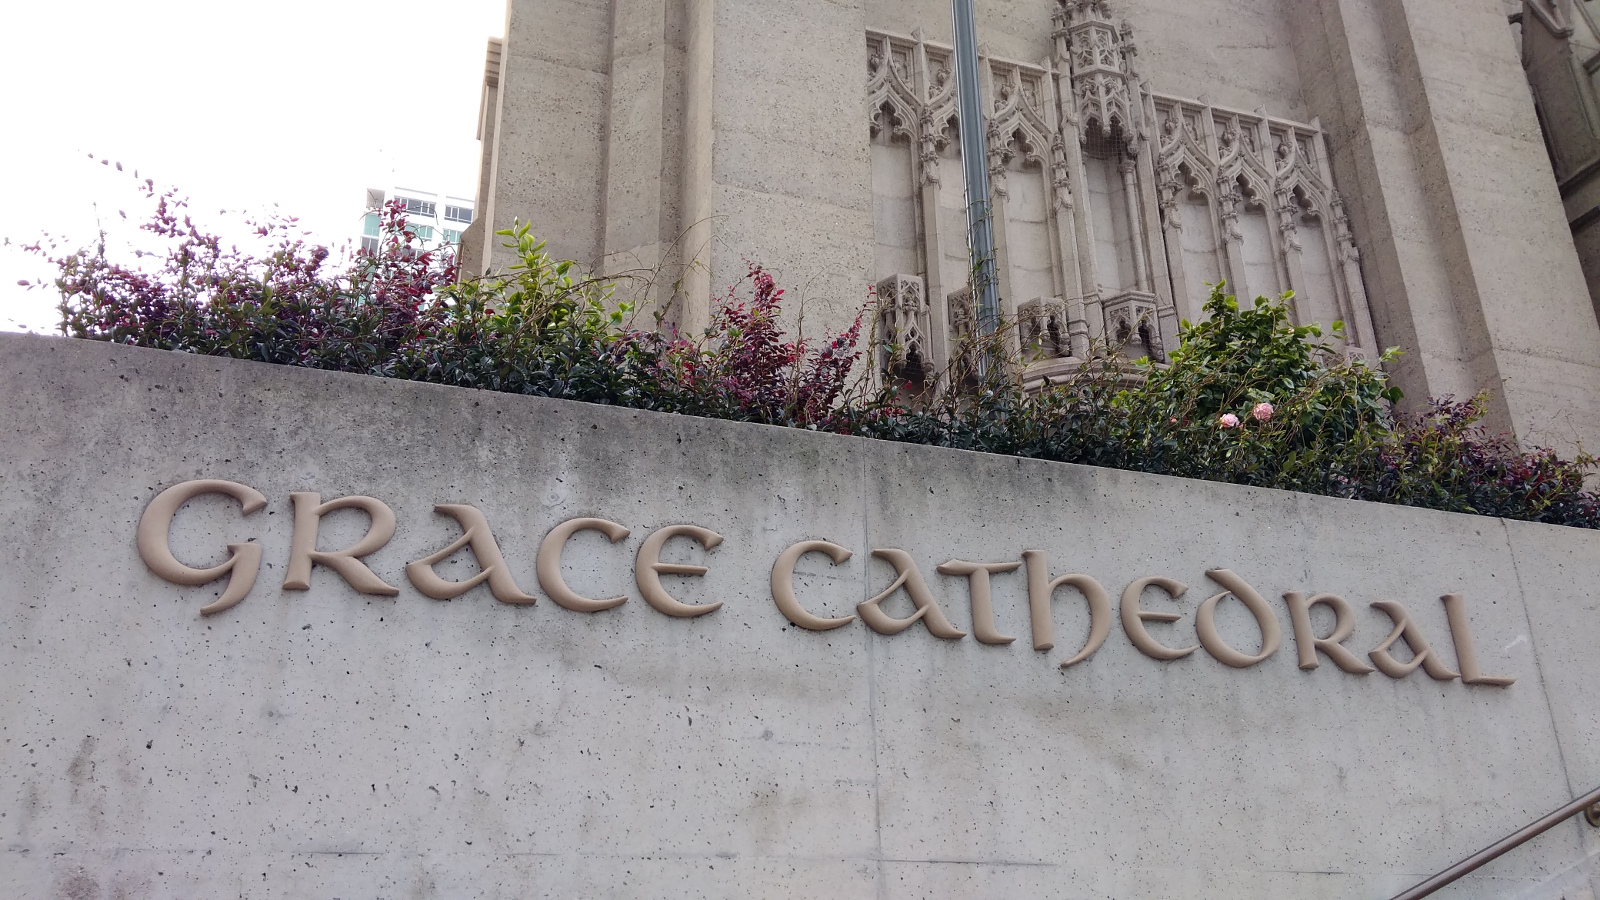 Almost all signage at the cathedral is written in this quasi-medieval uncial script.